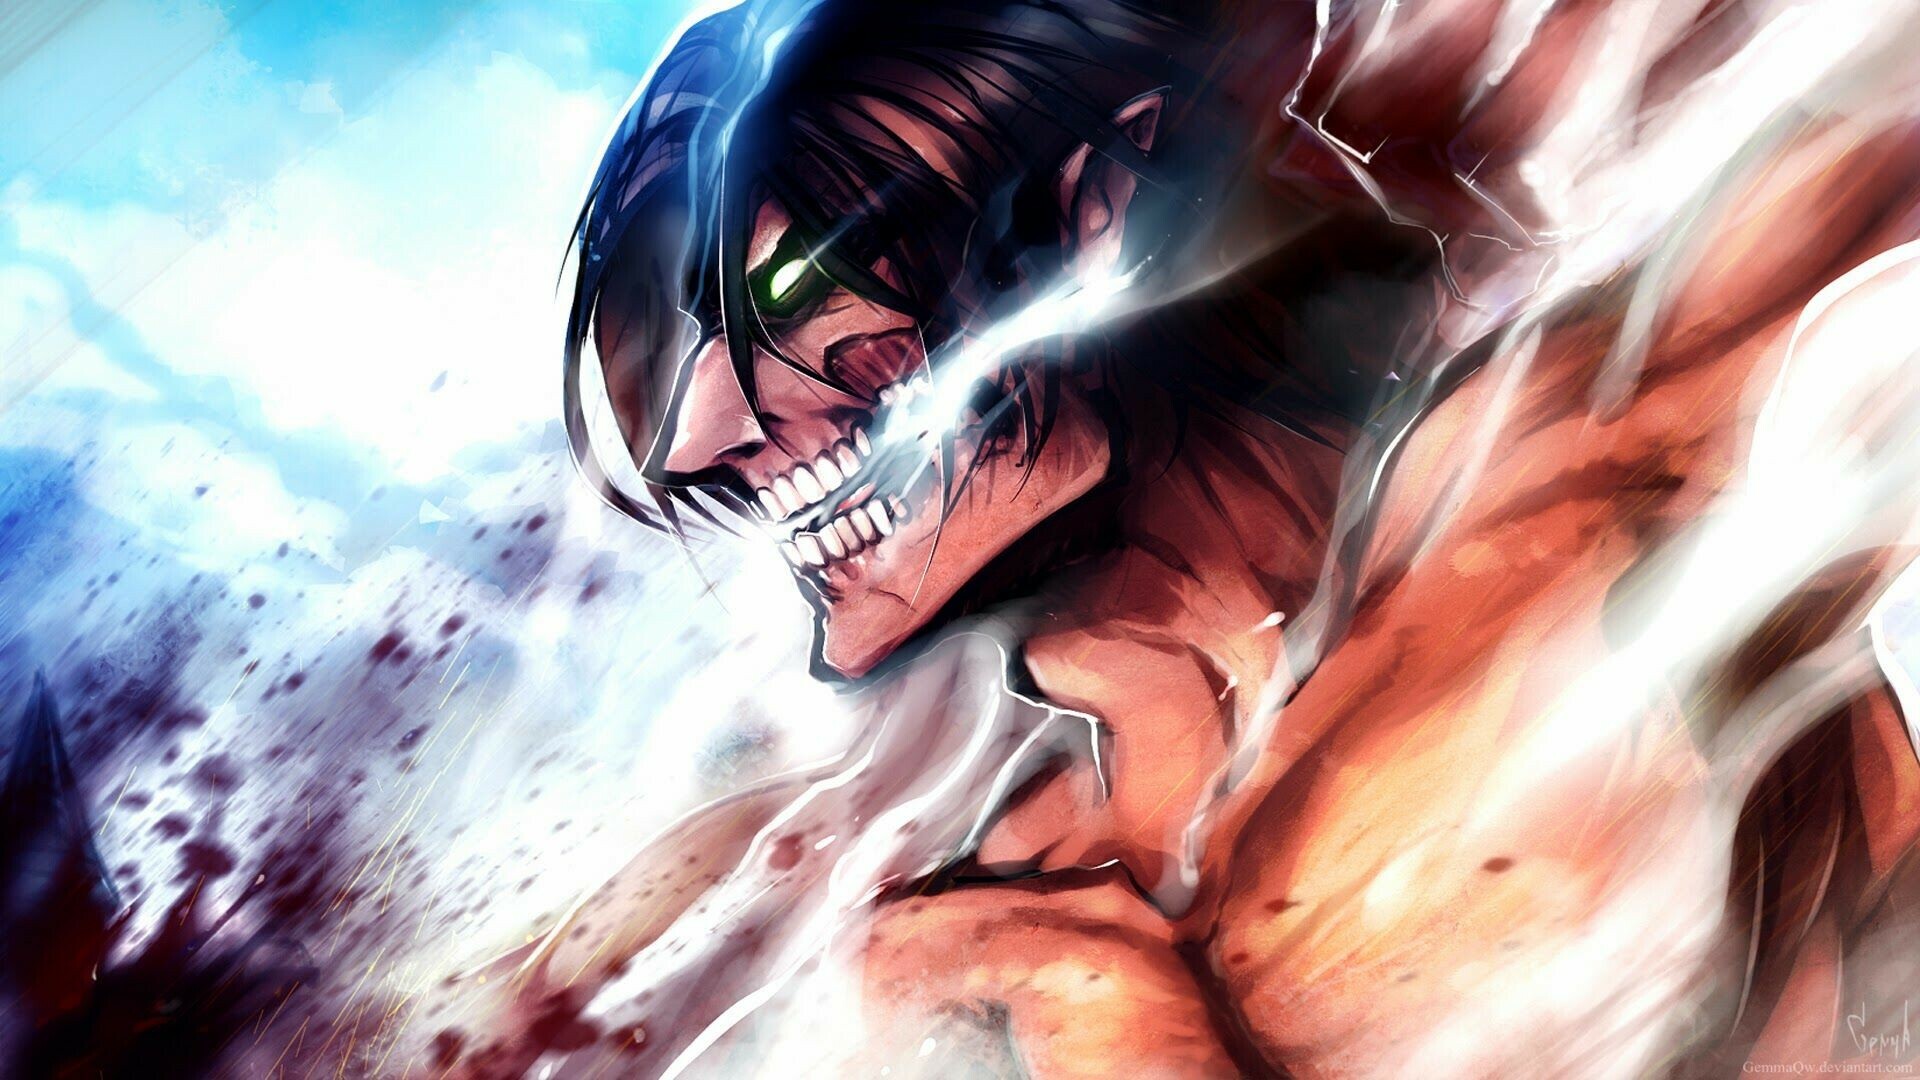 Attack on Titan (TV Series): Titans, Murderous giants who nearly consumed the human race 100 years ago. 1920x1080 Full HD Wallpaper.